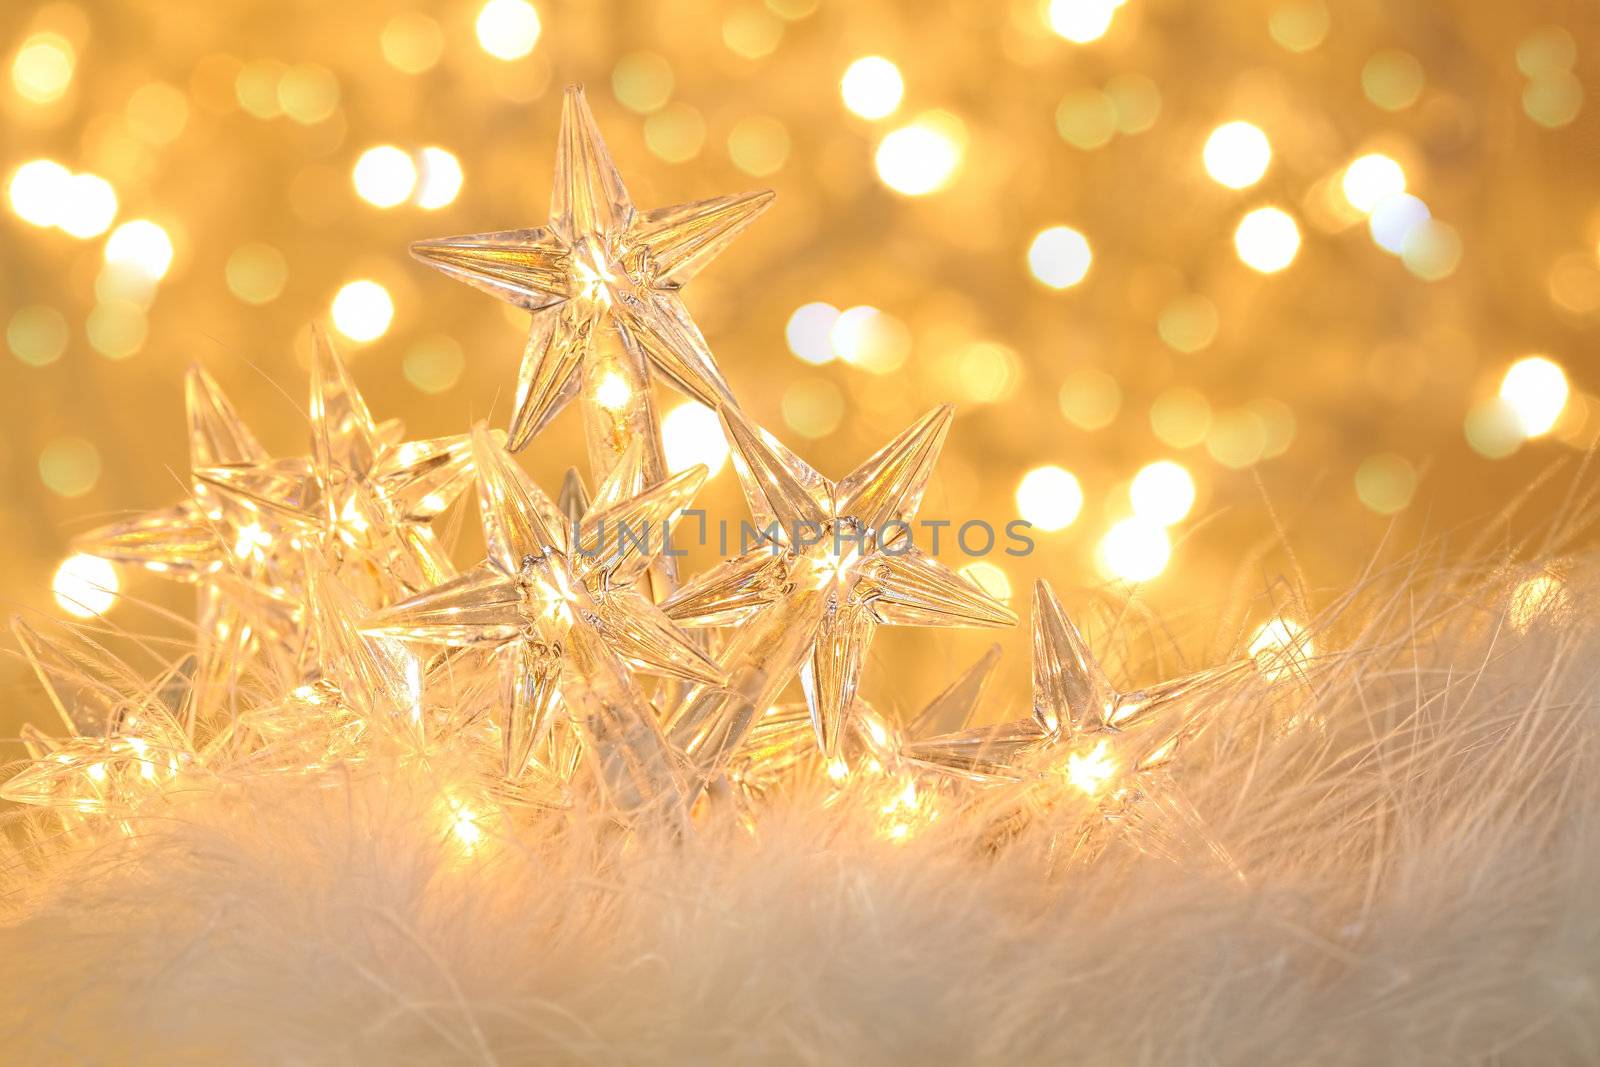 Star holiday lights with gold sparkle background